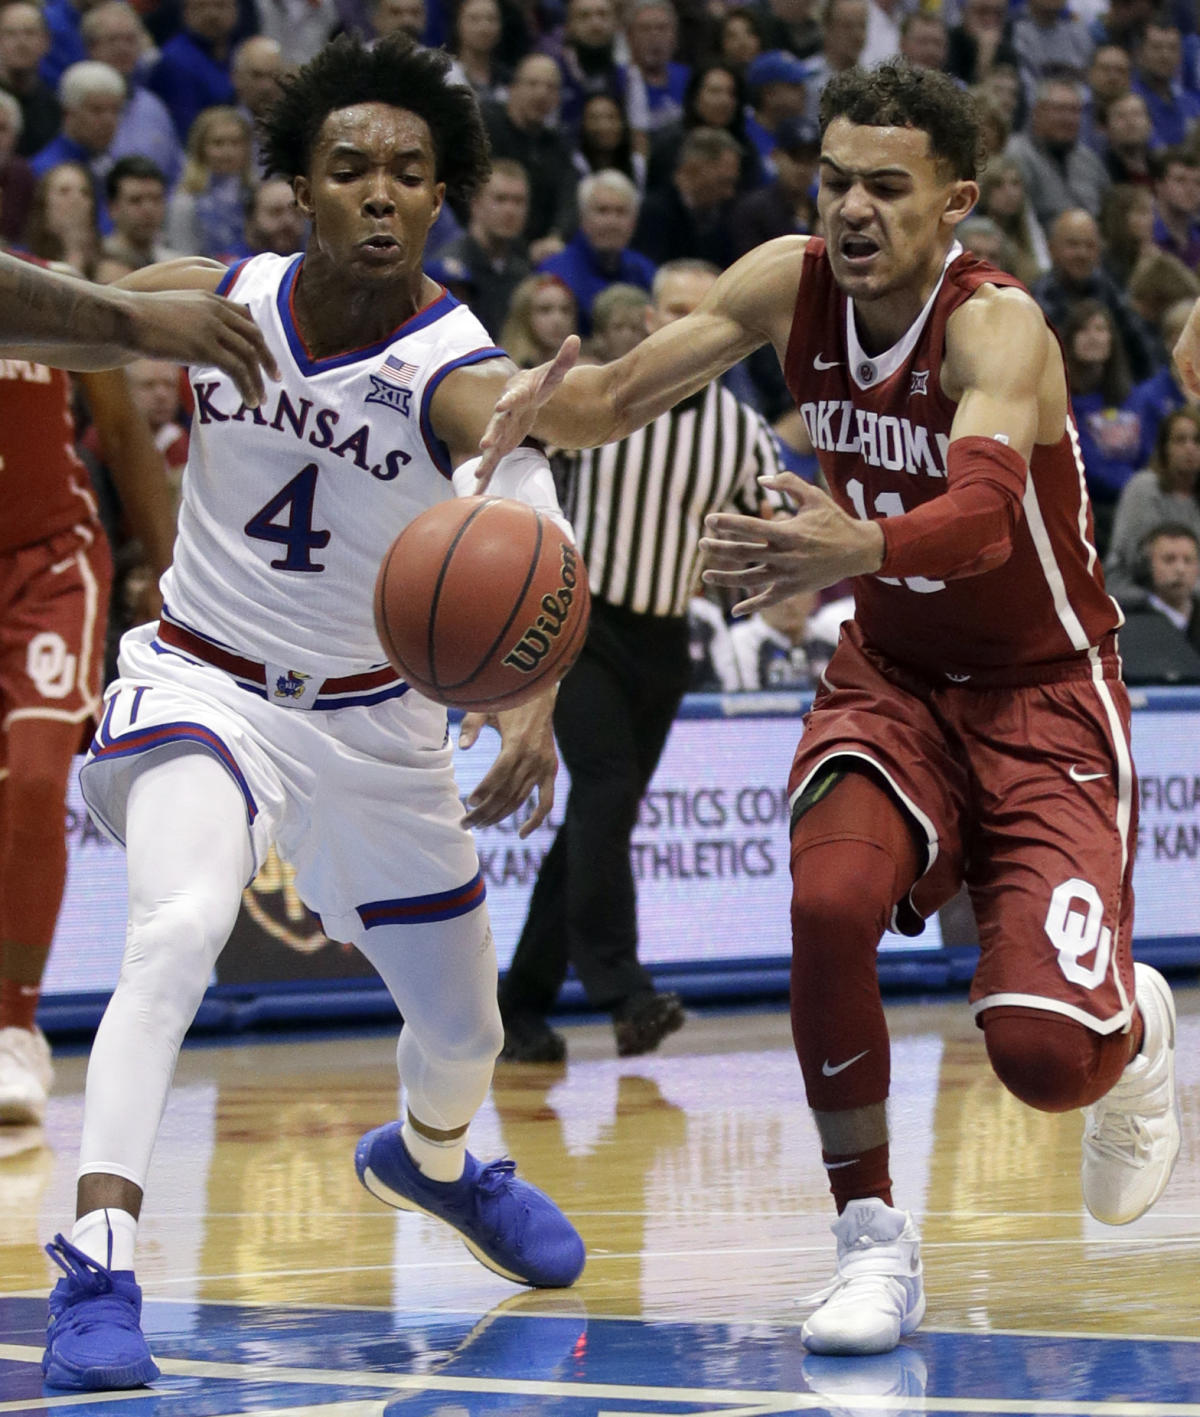 Oklahoma freshman Trae Young is dominating college basketball this